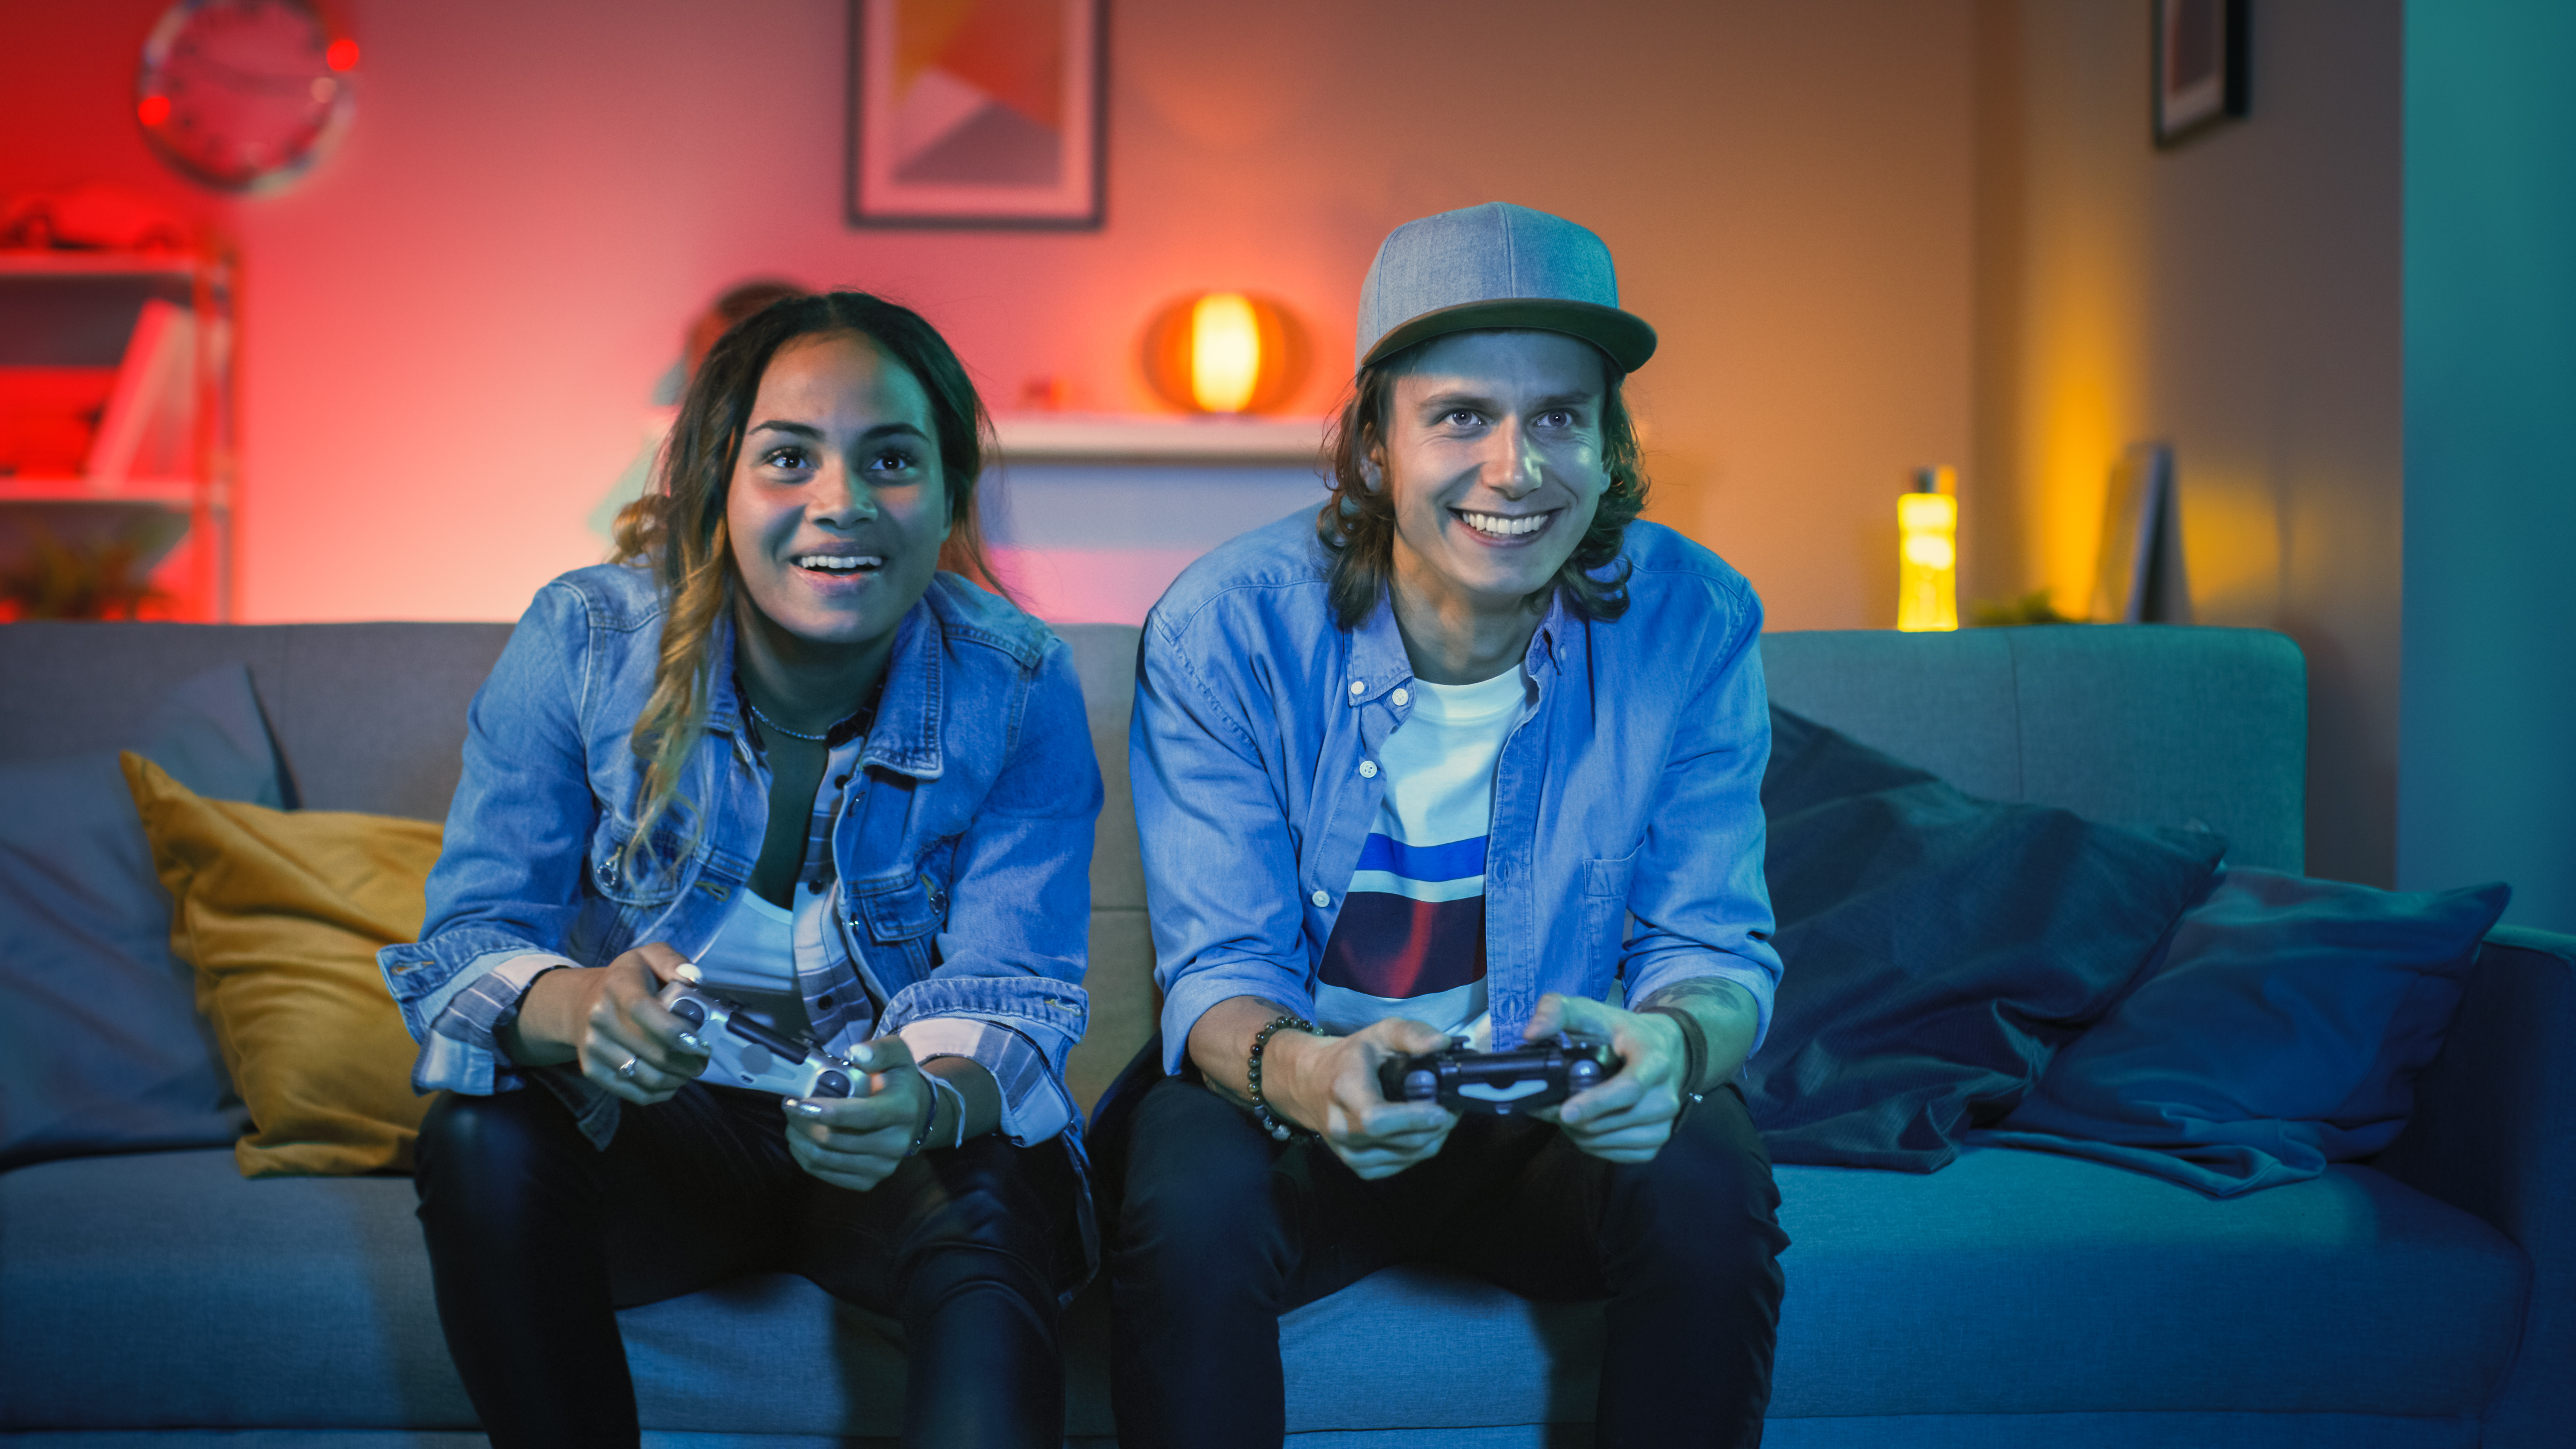 Two gamers holding controllers and playing game